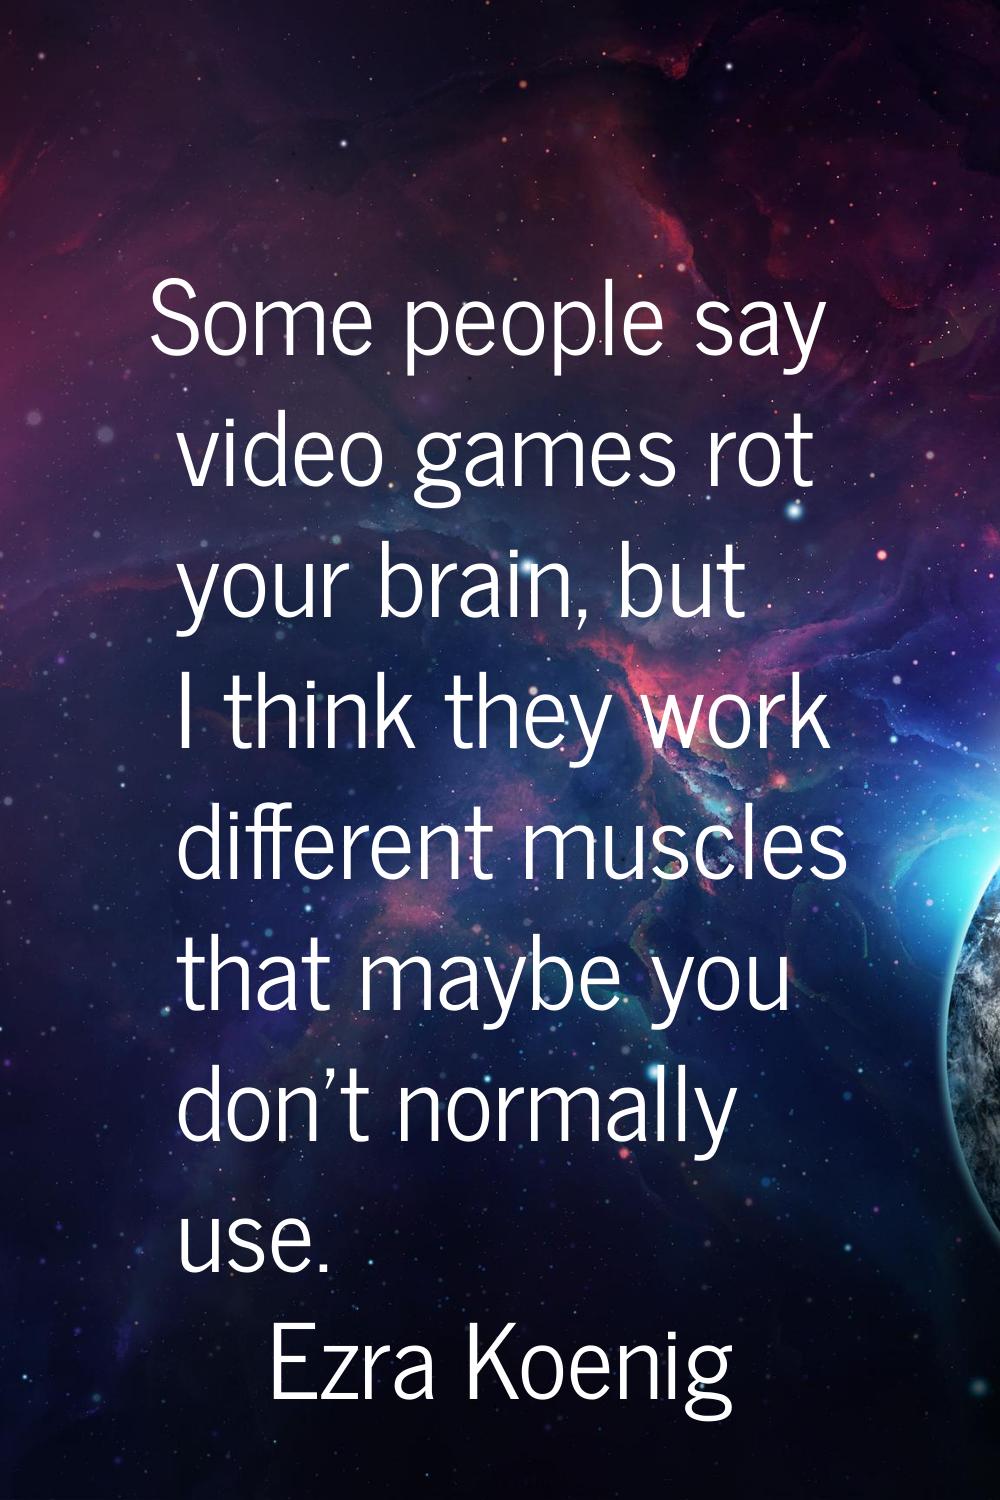 Some people say video games rot your brain, but I think they work different muscles that maybe you 